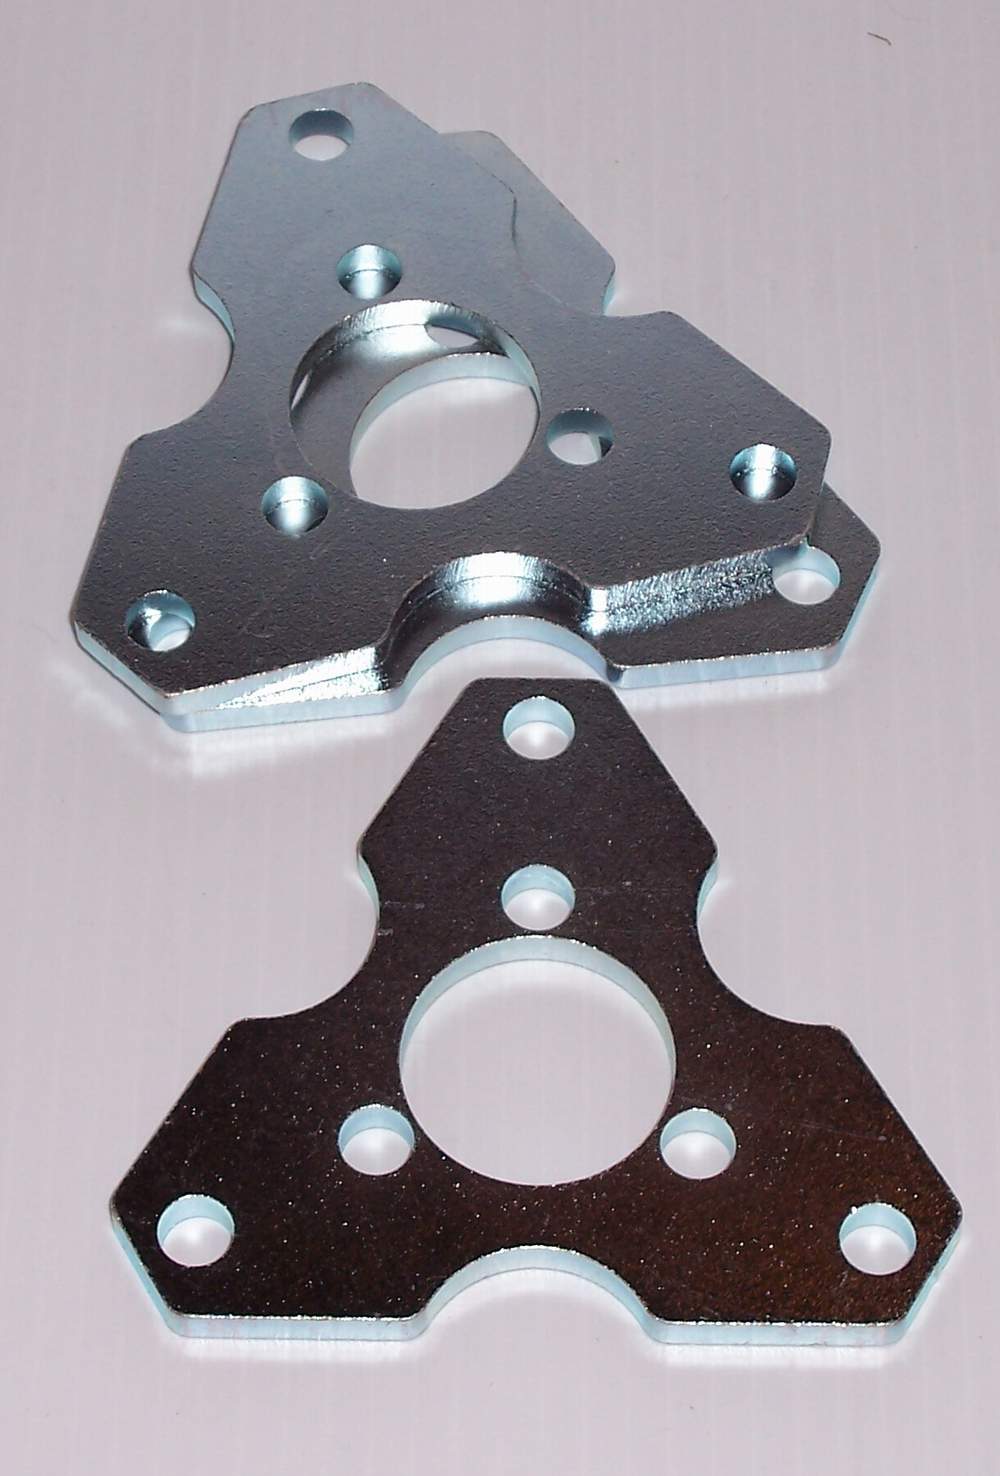 New Steel 4 Bolt Adapter Plate w/ Lugs for Honda ATC 90 All-Terrain Cycle 2283 